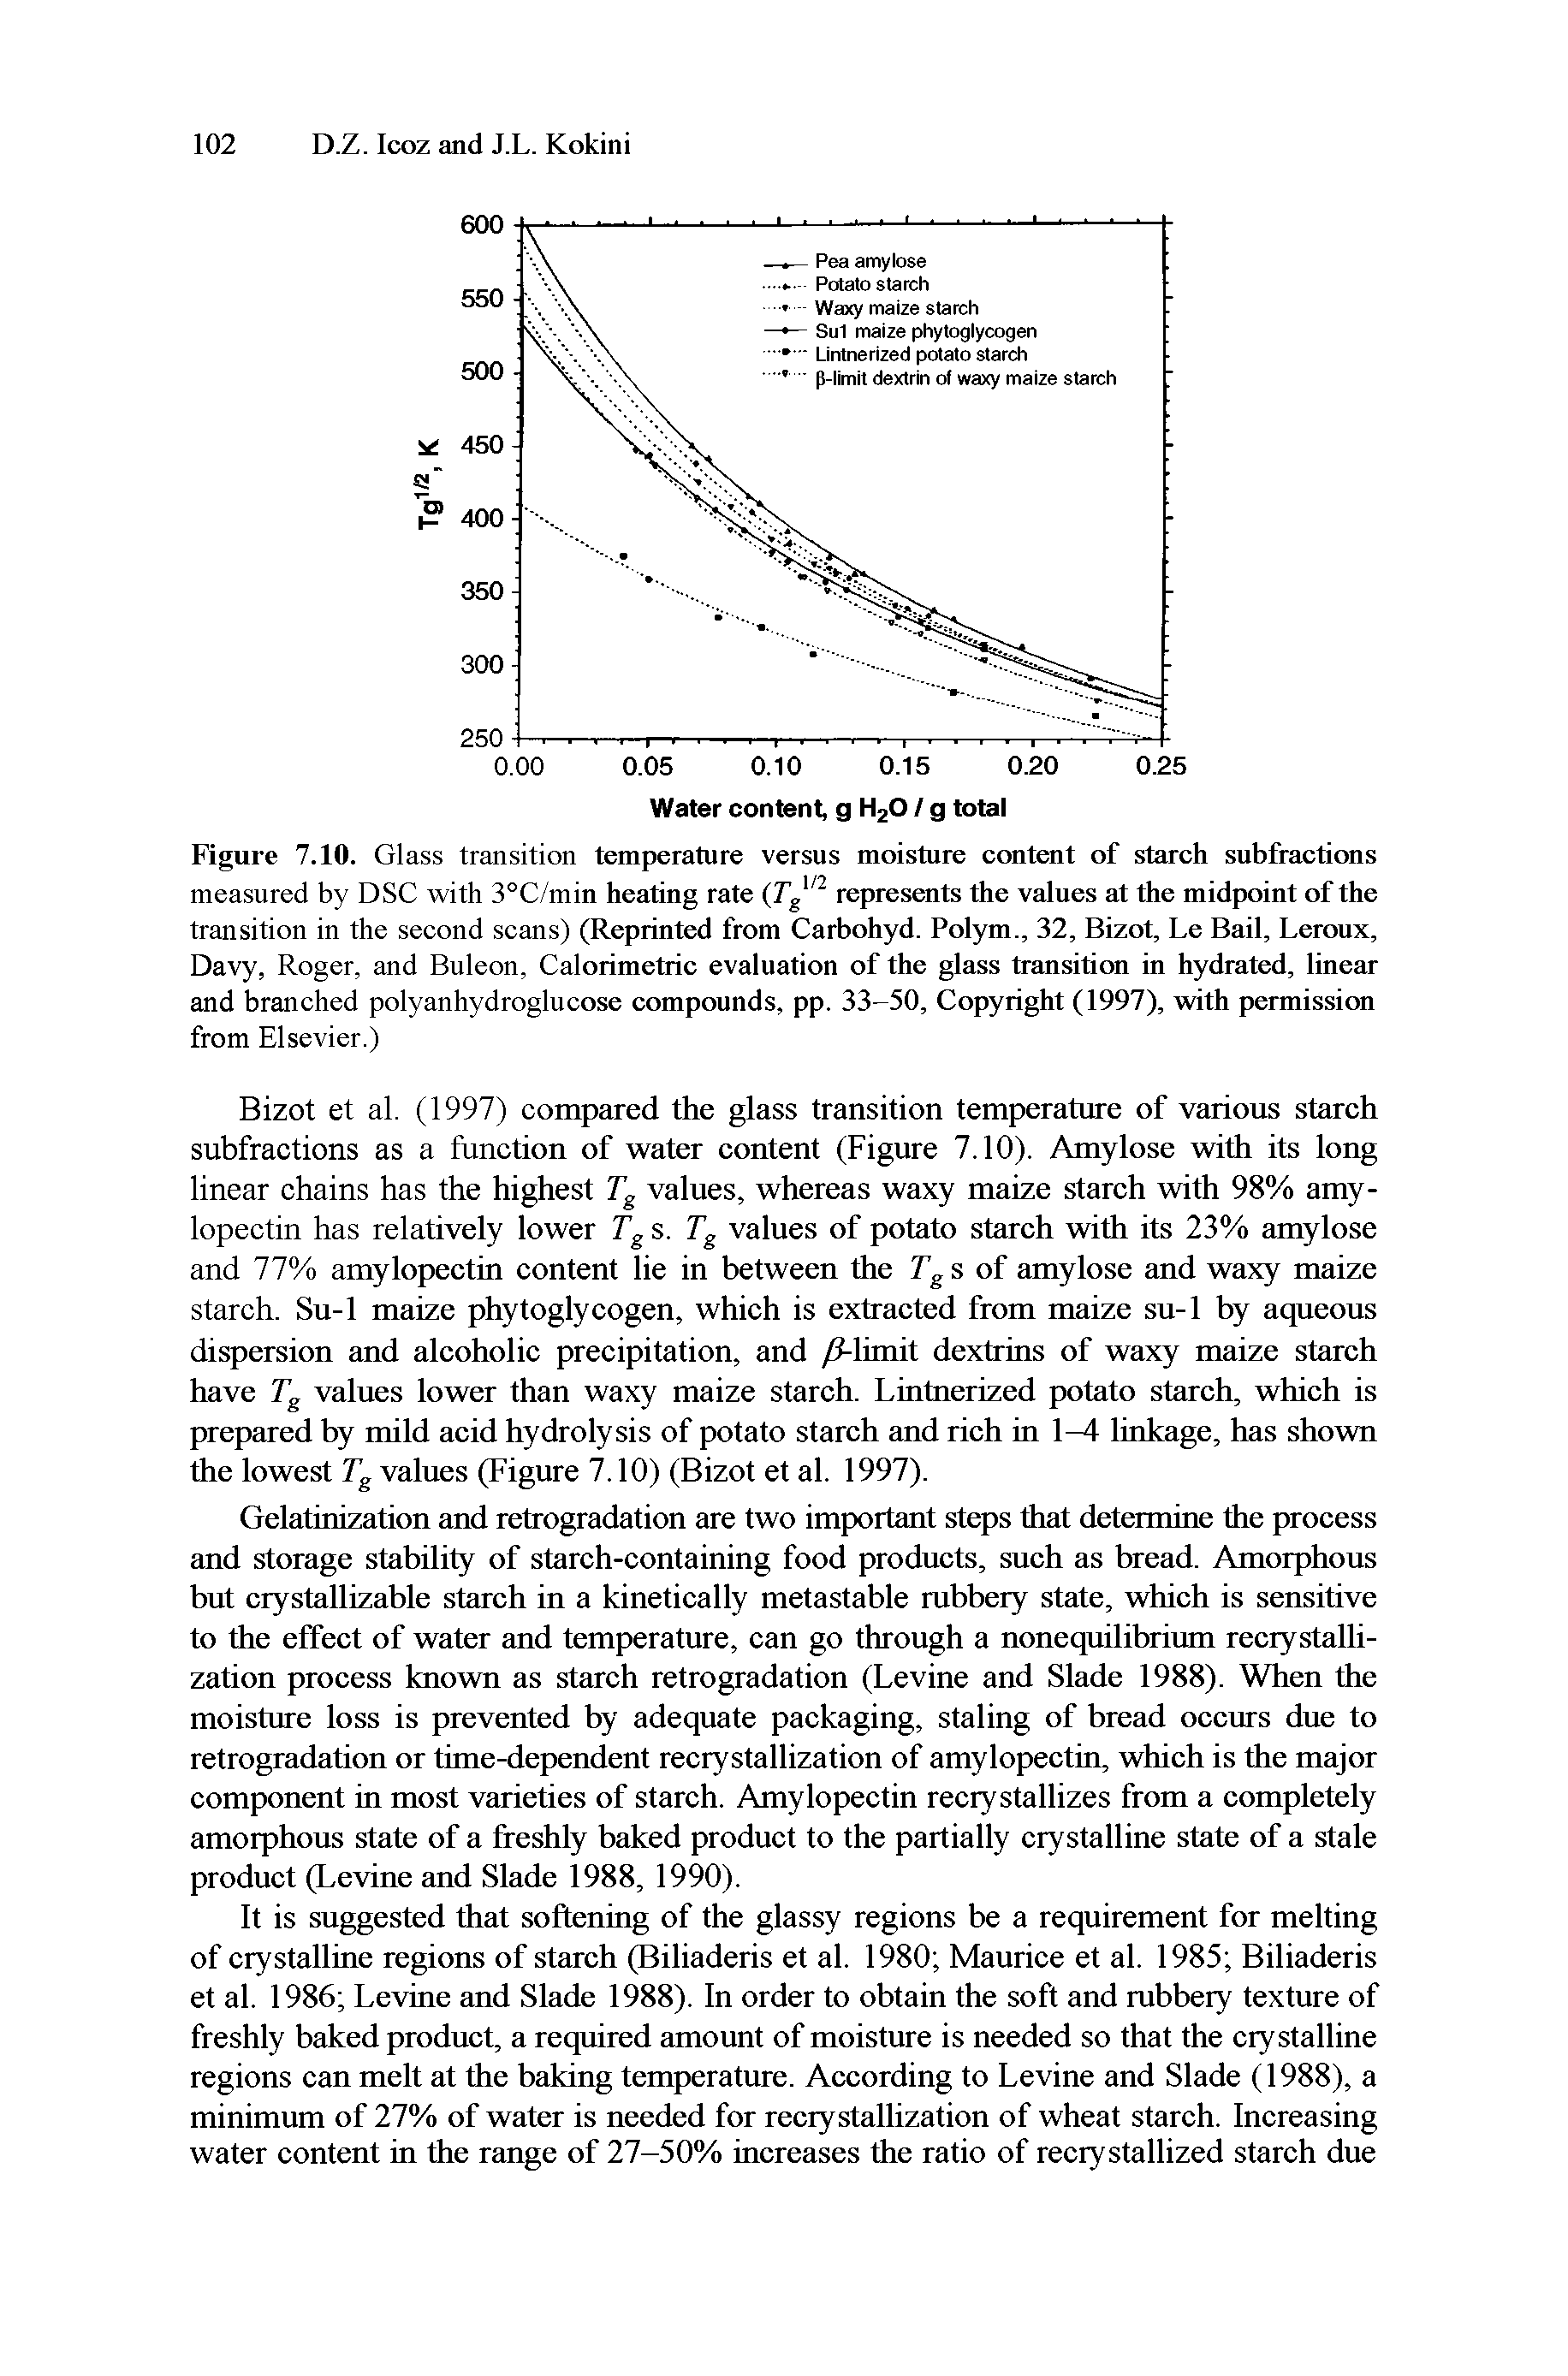 Figure 7.10. Glass transition temperature versus moisture eontent of stareh subifactions measured by DSC with 3°C/min heating rate (Tg represents the values at the midpoint of the transition in the second scans) (Reprinted from Carbohyd. Polym., 32, Bizot, Le Bail, Leroux, Davy, Roger, and Buleon, Calorimetrie evaluation of the glass transition in hydrated, linear and branched polyanhydroglucose compounds, pp. 33-50, Copyright (1997), with permission from Elsevier.)...